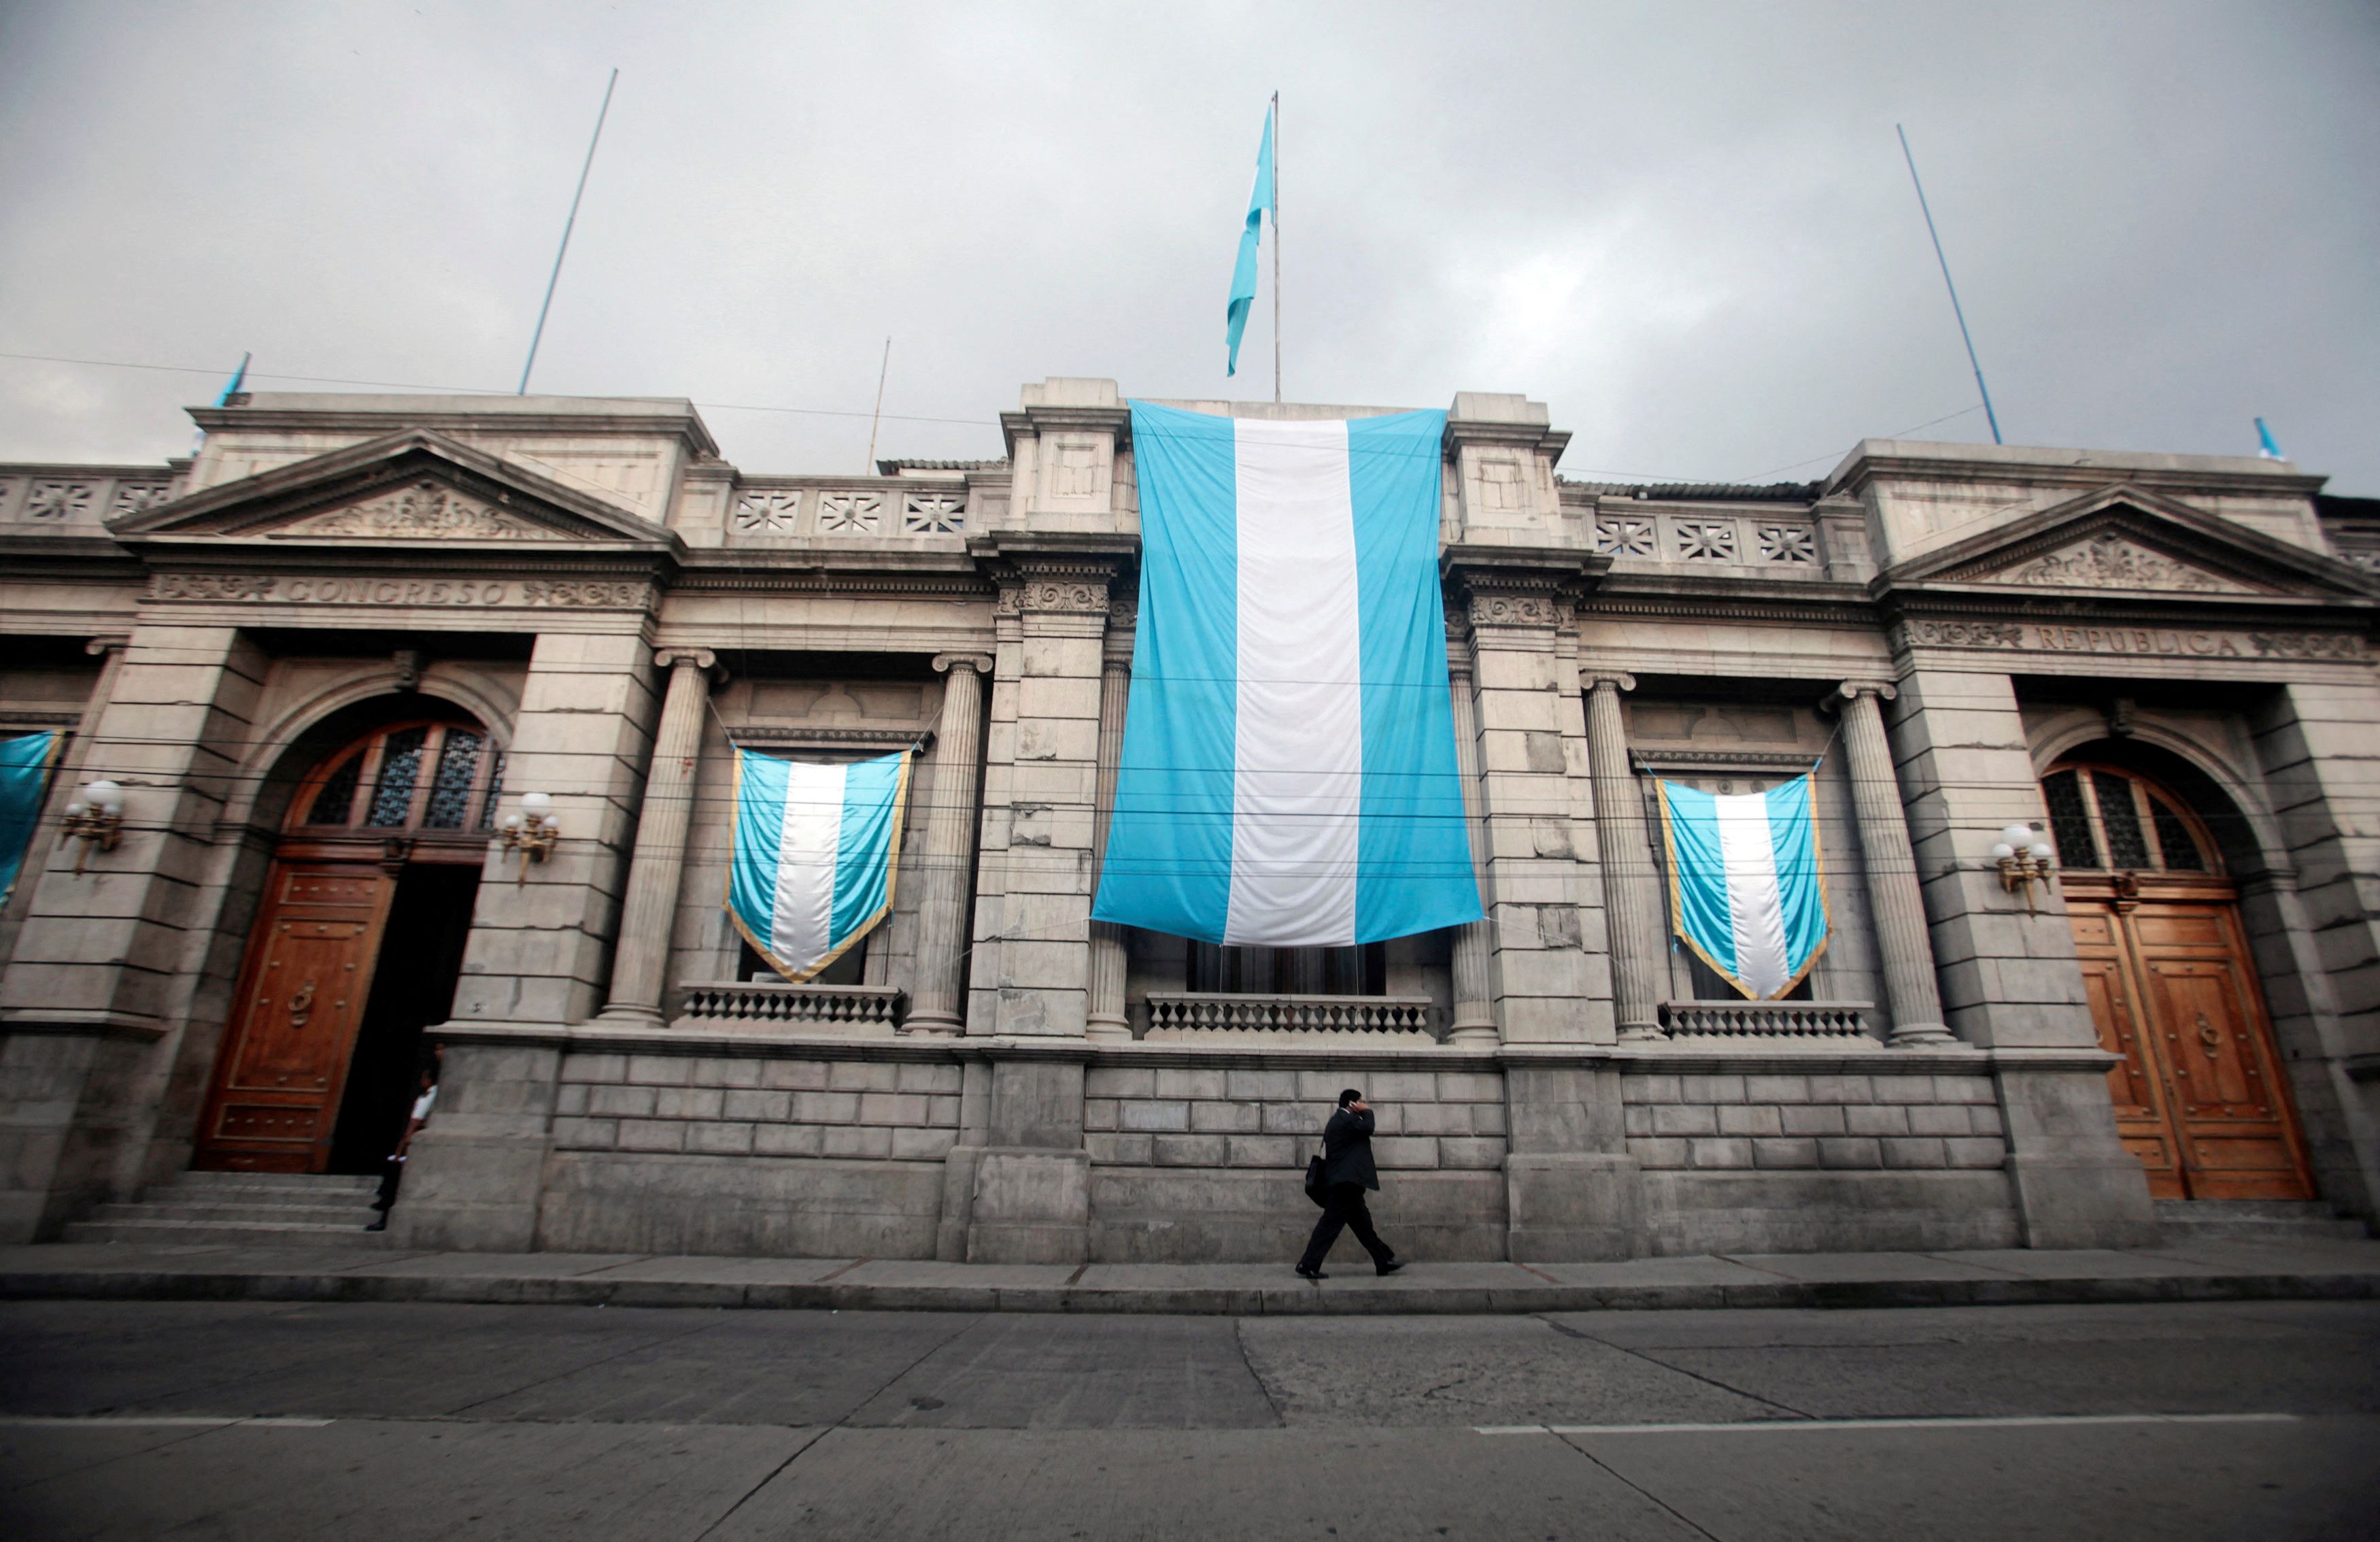 A man walks past the Guatemalan Congress which is decorated with Guatemalan flags as part of the 191th Guatemala Independence Day celebrations in Guatemala City